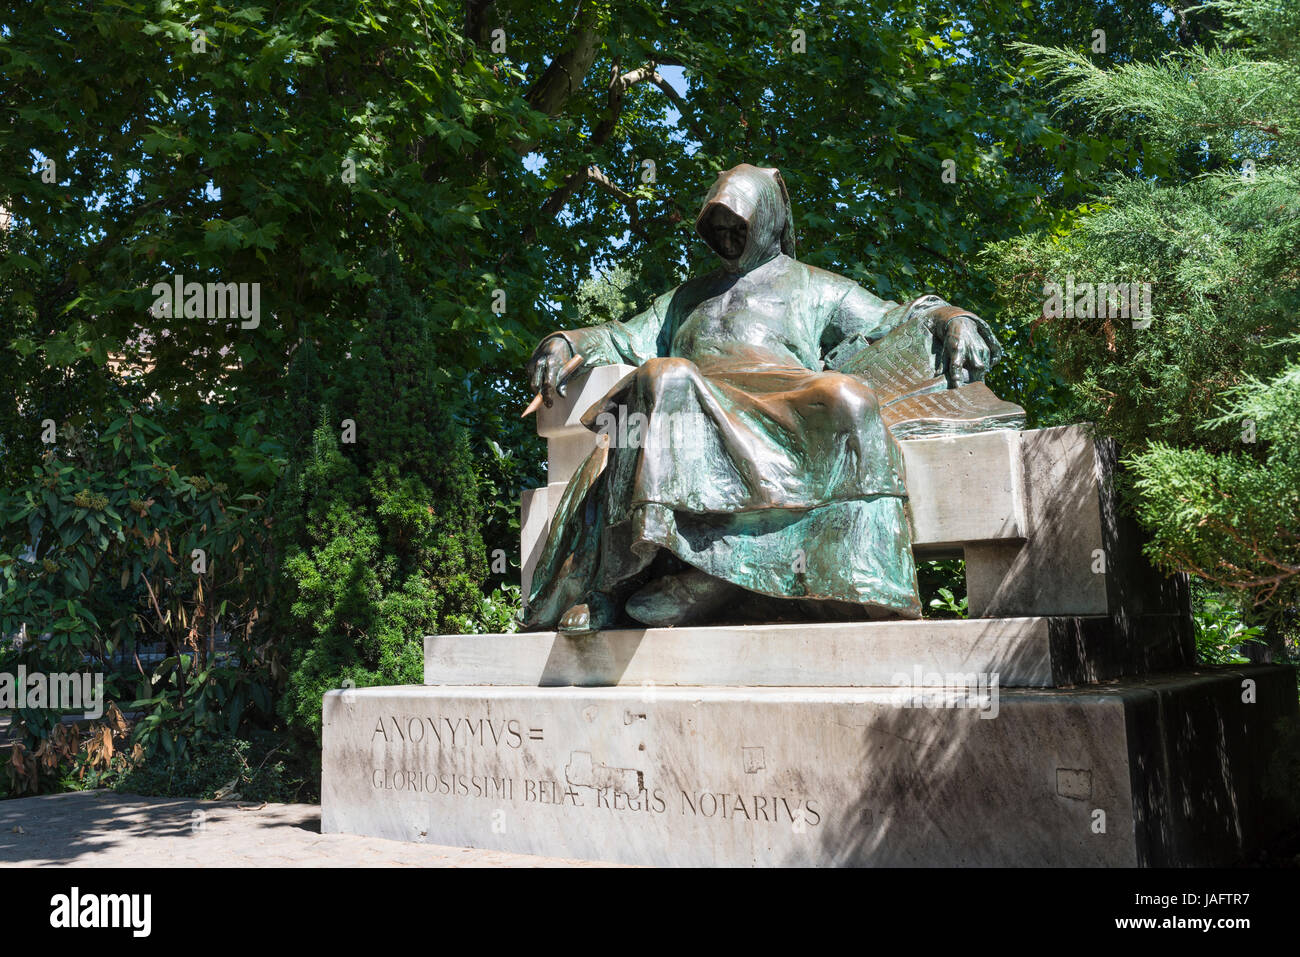 Statue of hooded seated man in the grounds of Vajdahunyad Castle, Budapest, Hungary Stock Photo